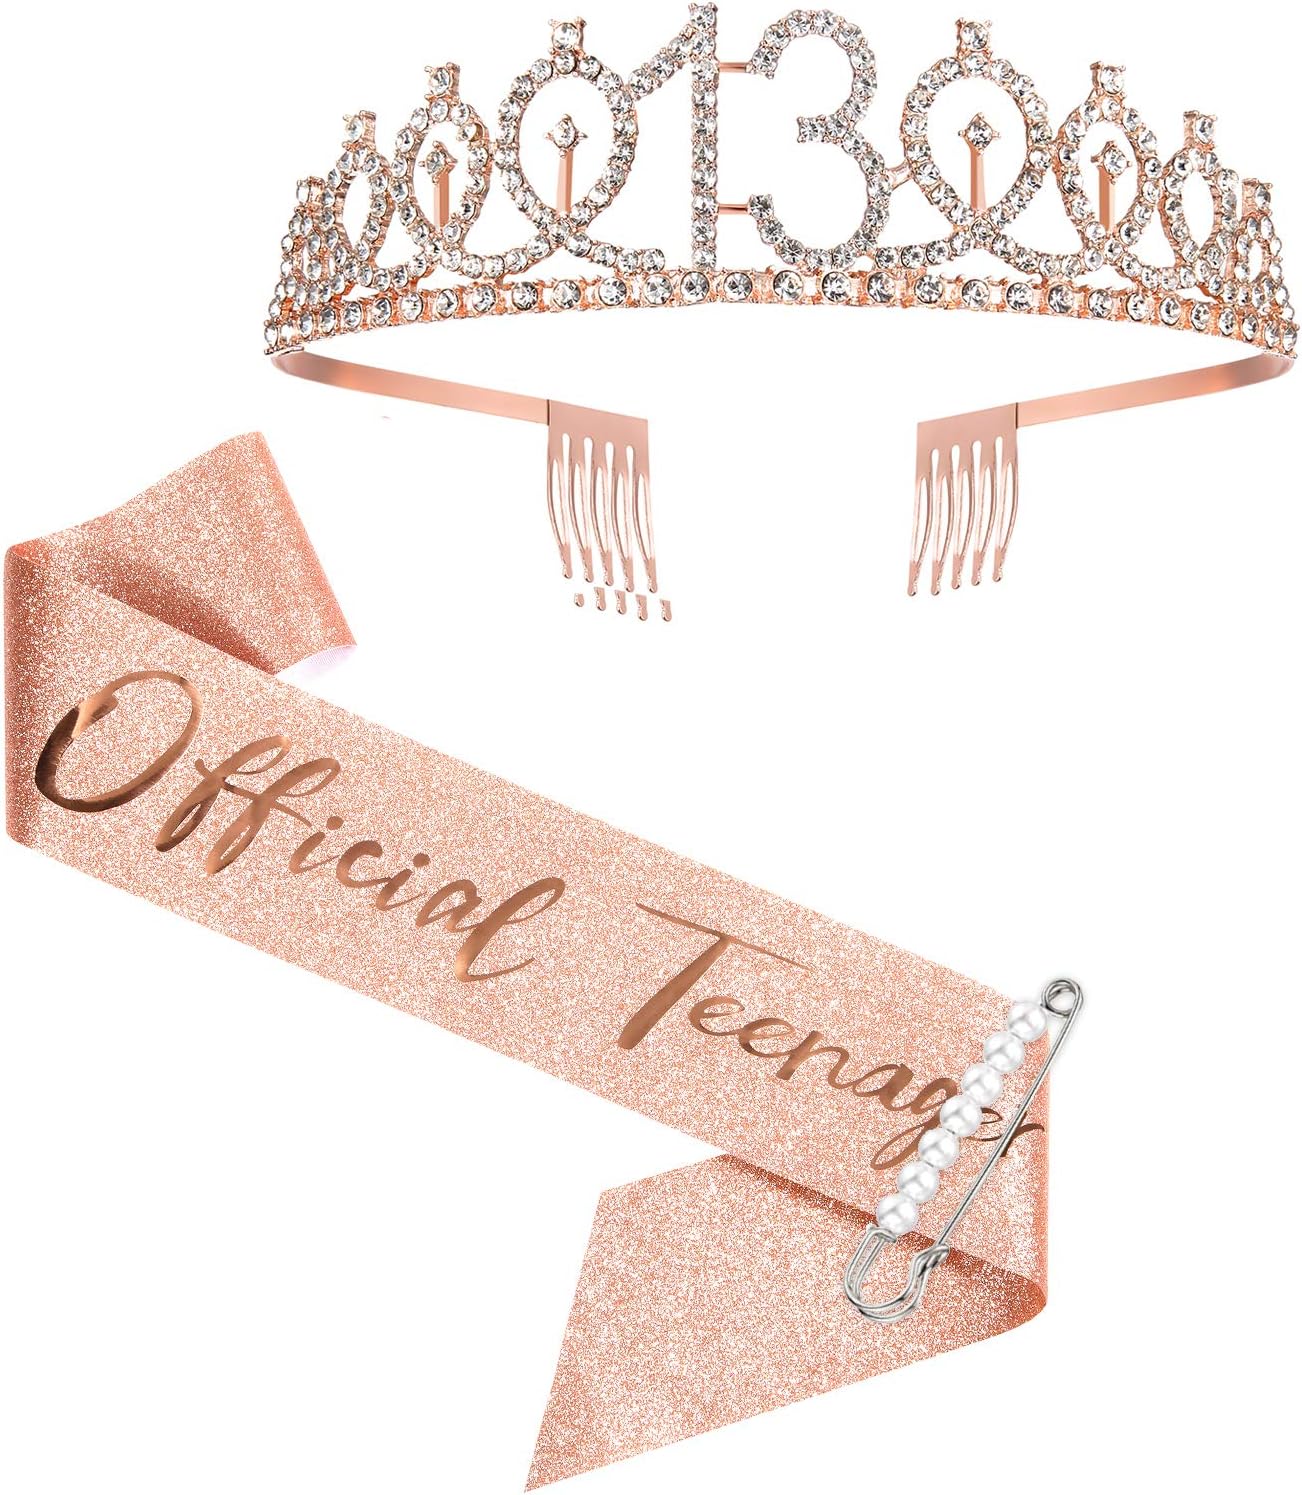 13th Birthday Sash and Crown for Girls, Rose Gold Official Teenager Sash and Tiara for Girls, 13th Birthday Gifts for Happy 13th Birthday Party Favor Supplies